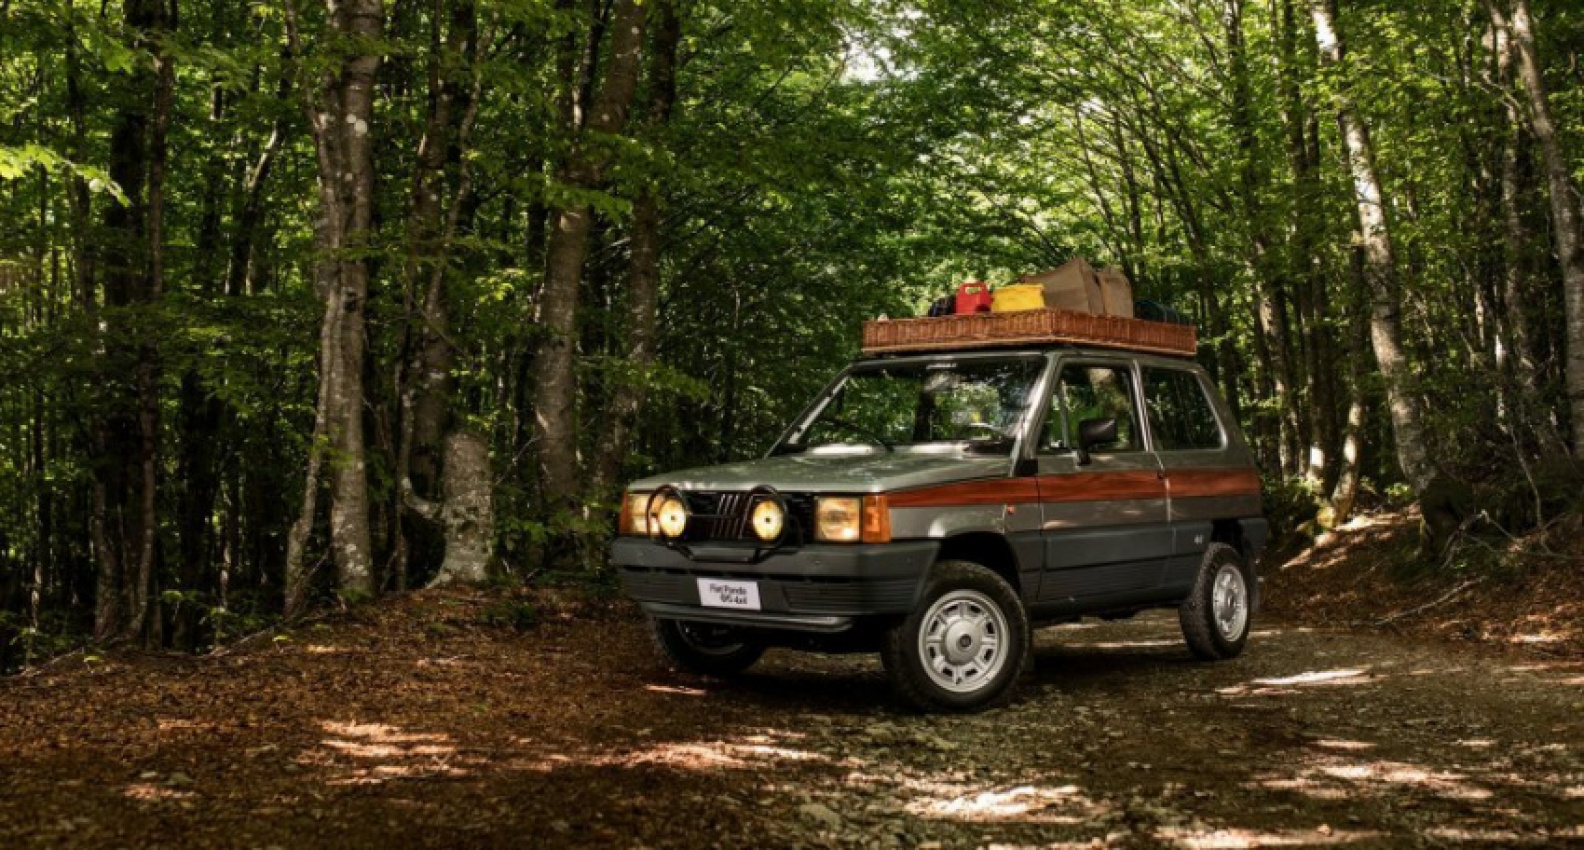 autos, cars, fiat, join the custom fiat panda 4x4s movement with these creative restomods